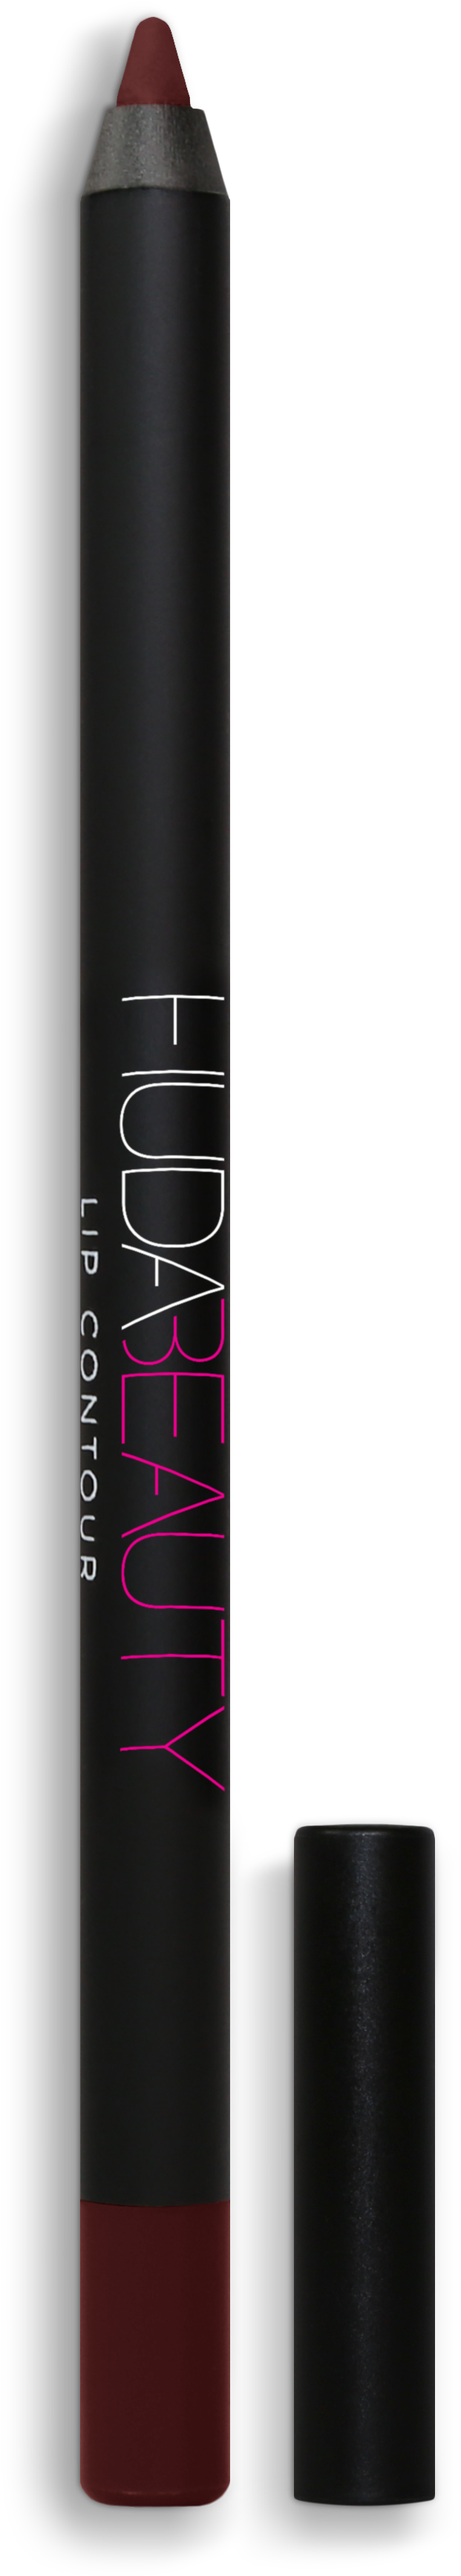 A Black Tube With Pink And White Text